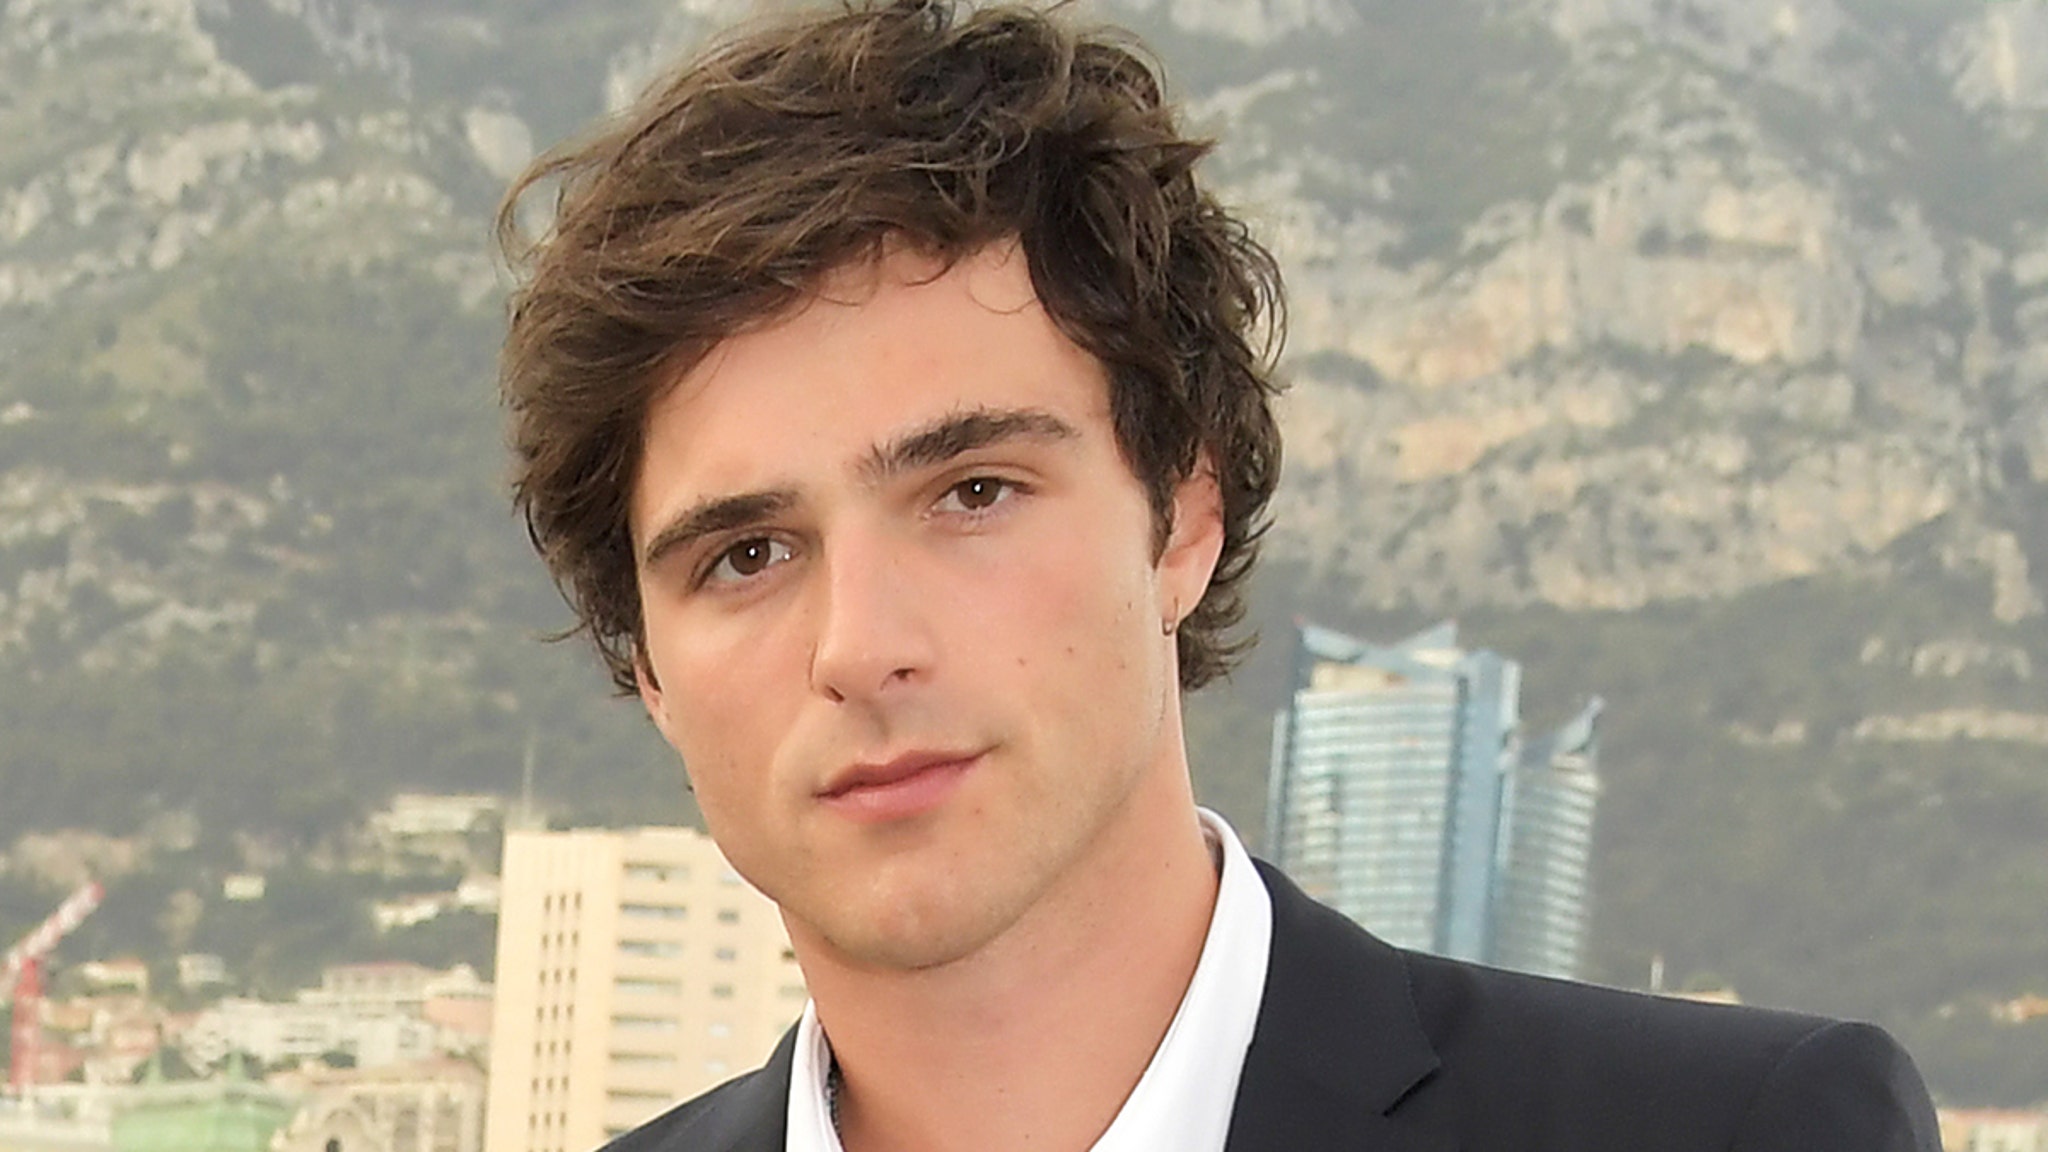 ‘Euphoria’ Star Jacob Elordi Getting Protection From Alleged Stalker